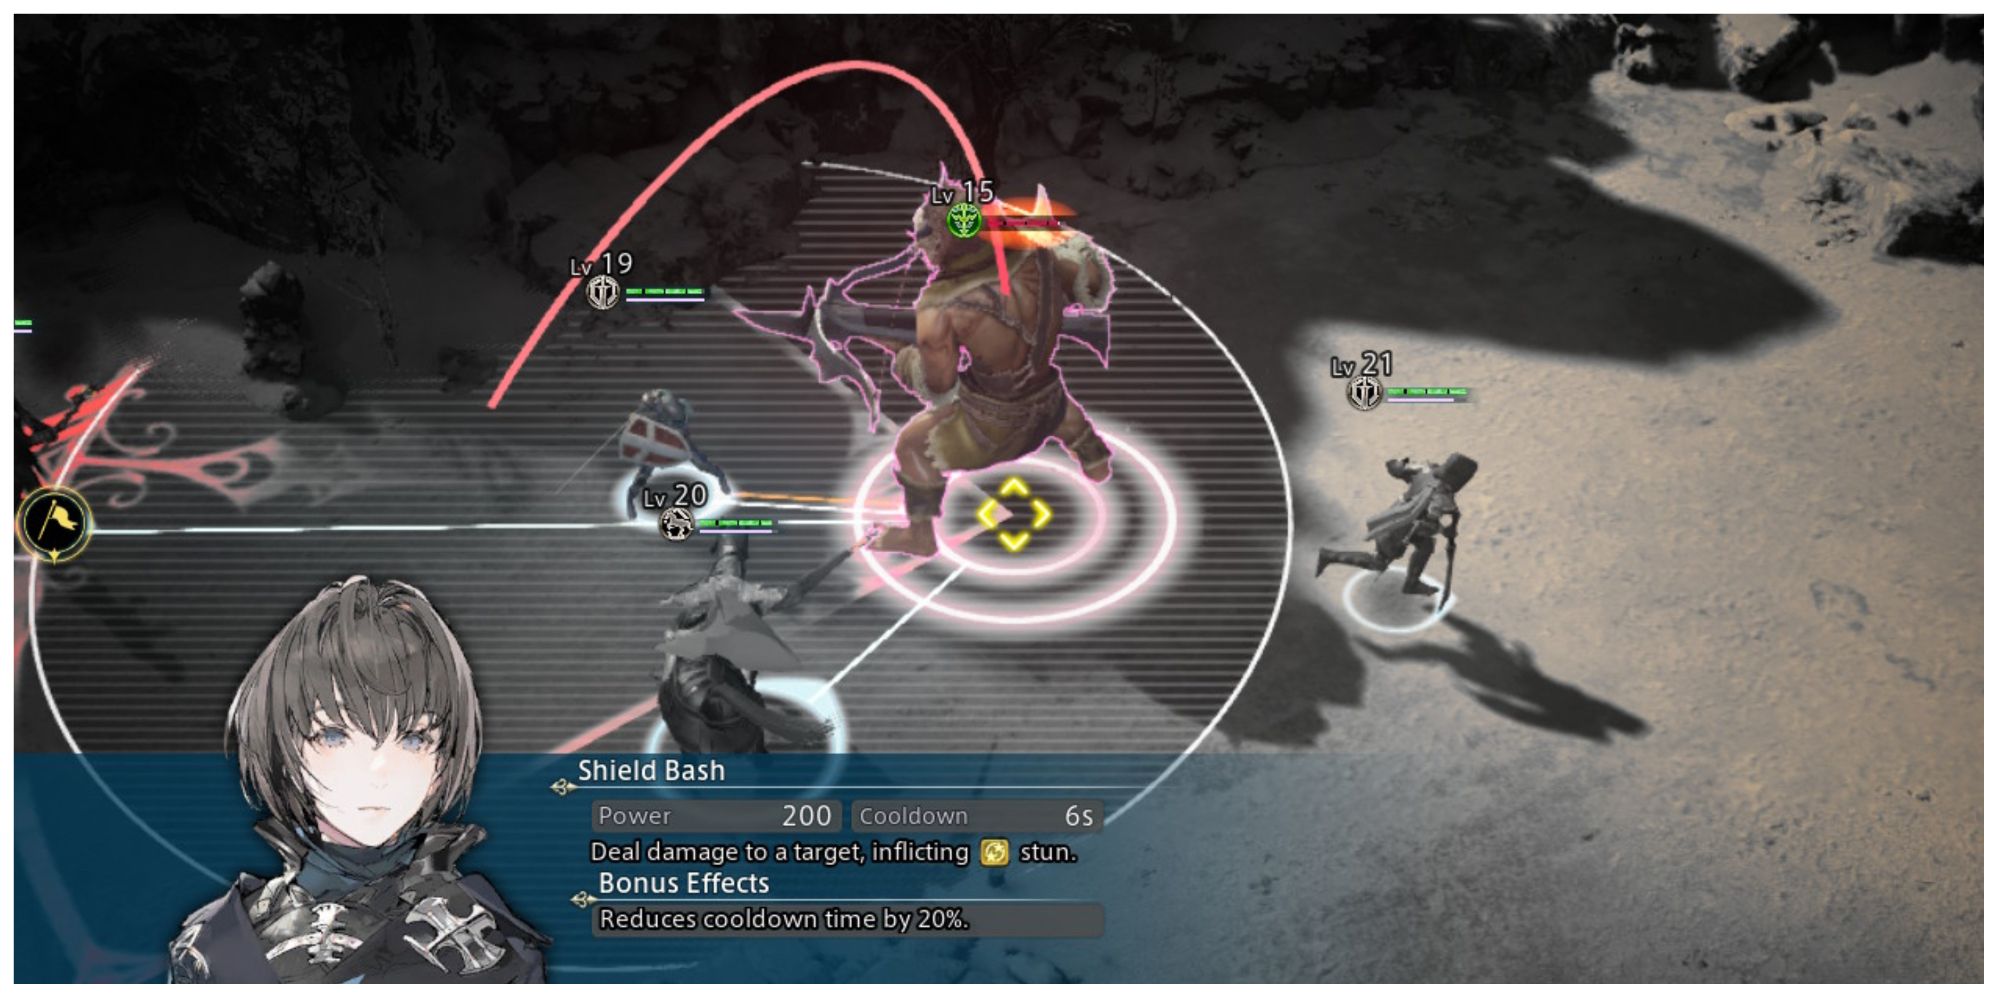 Battle scene showing Izelair and her Shield Bash skill in The DioField Chronicle